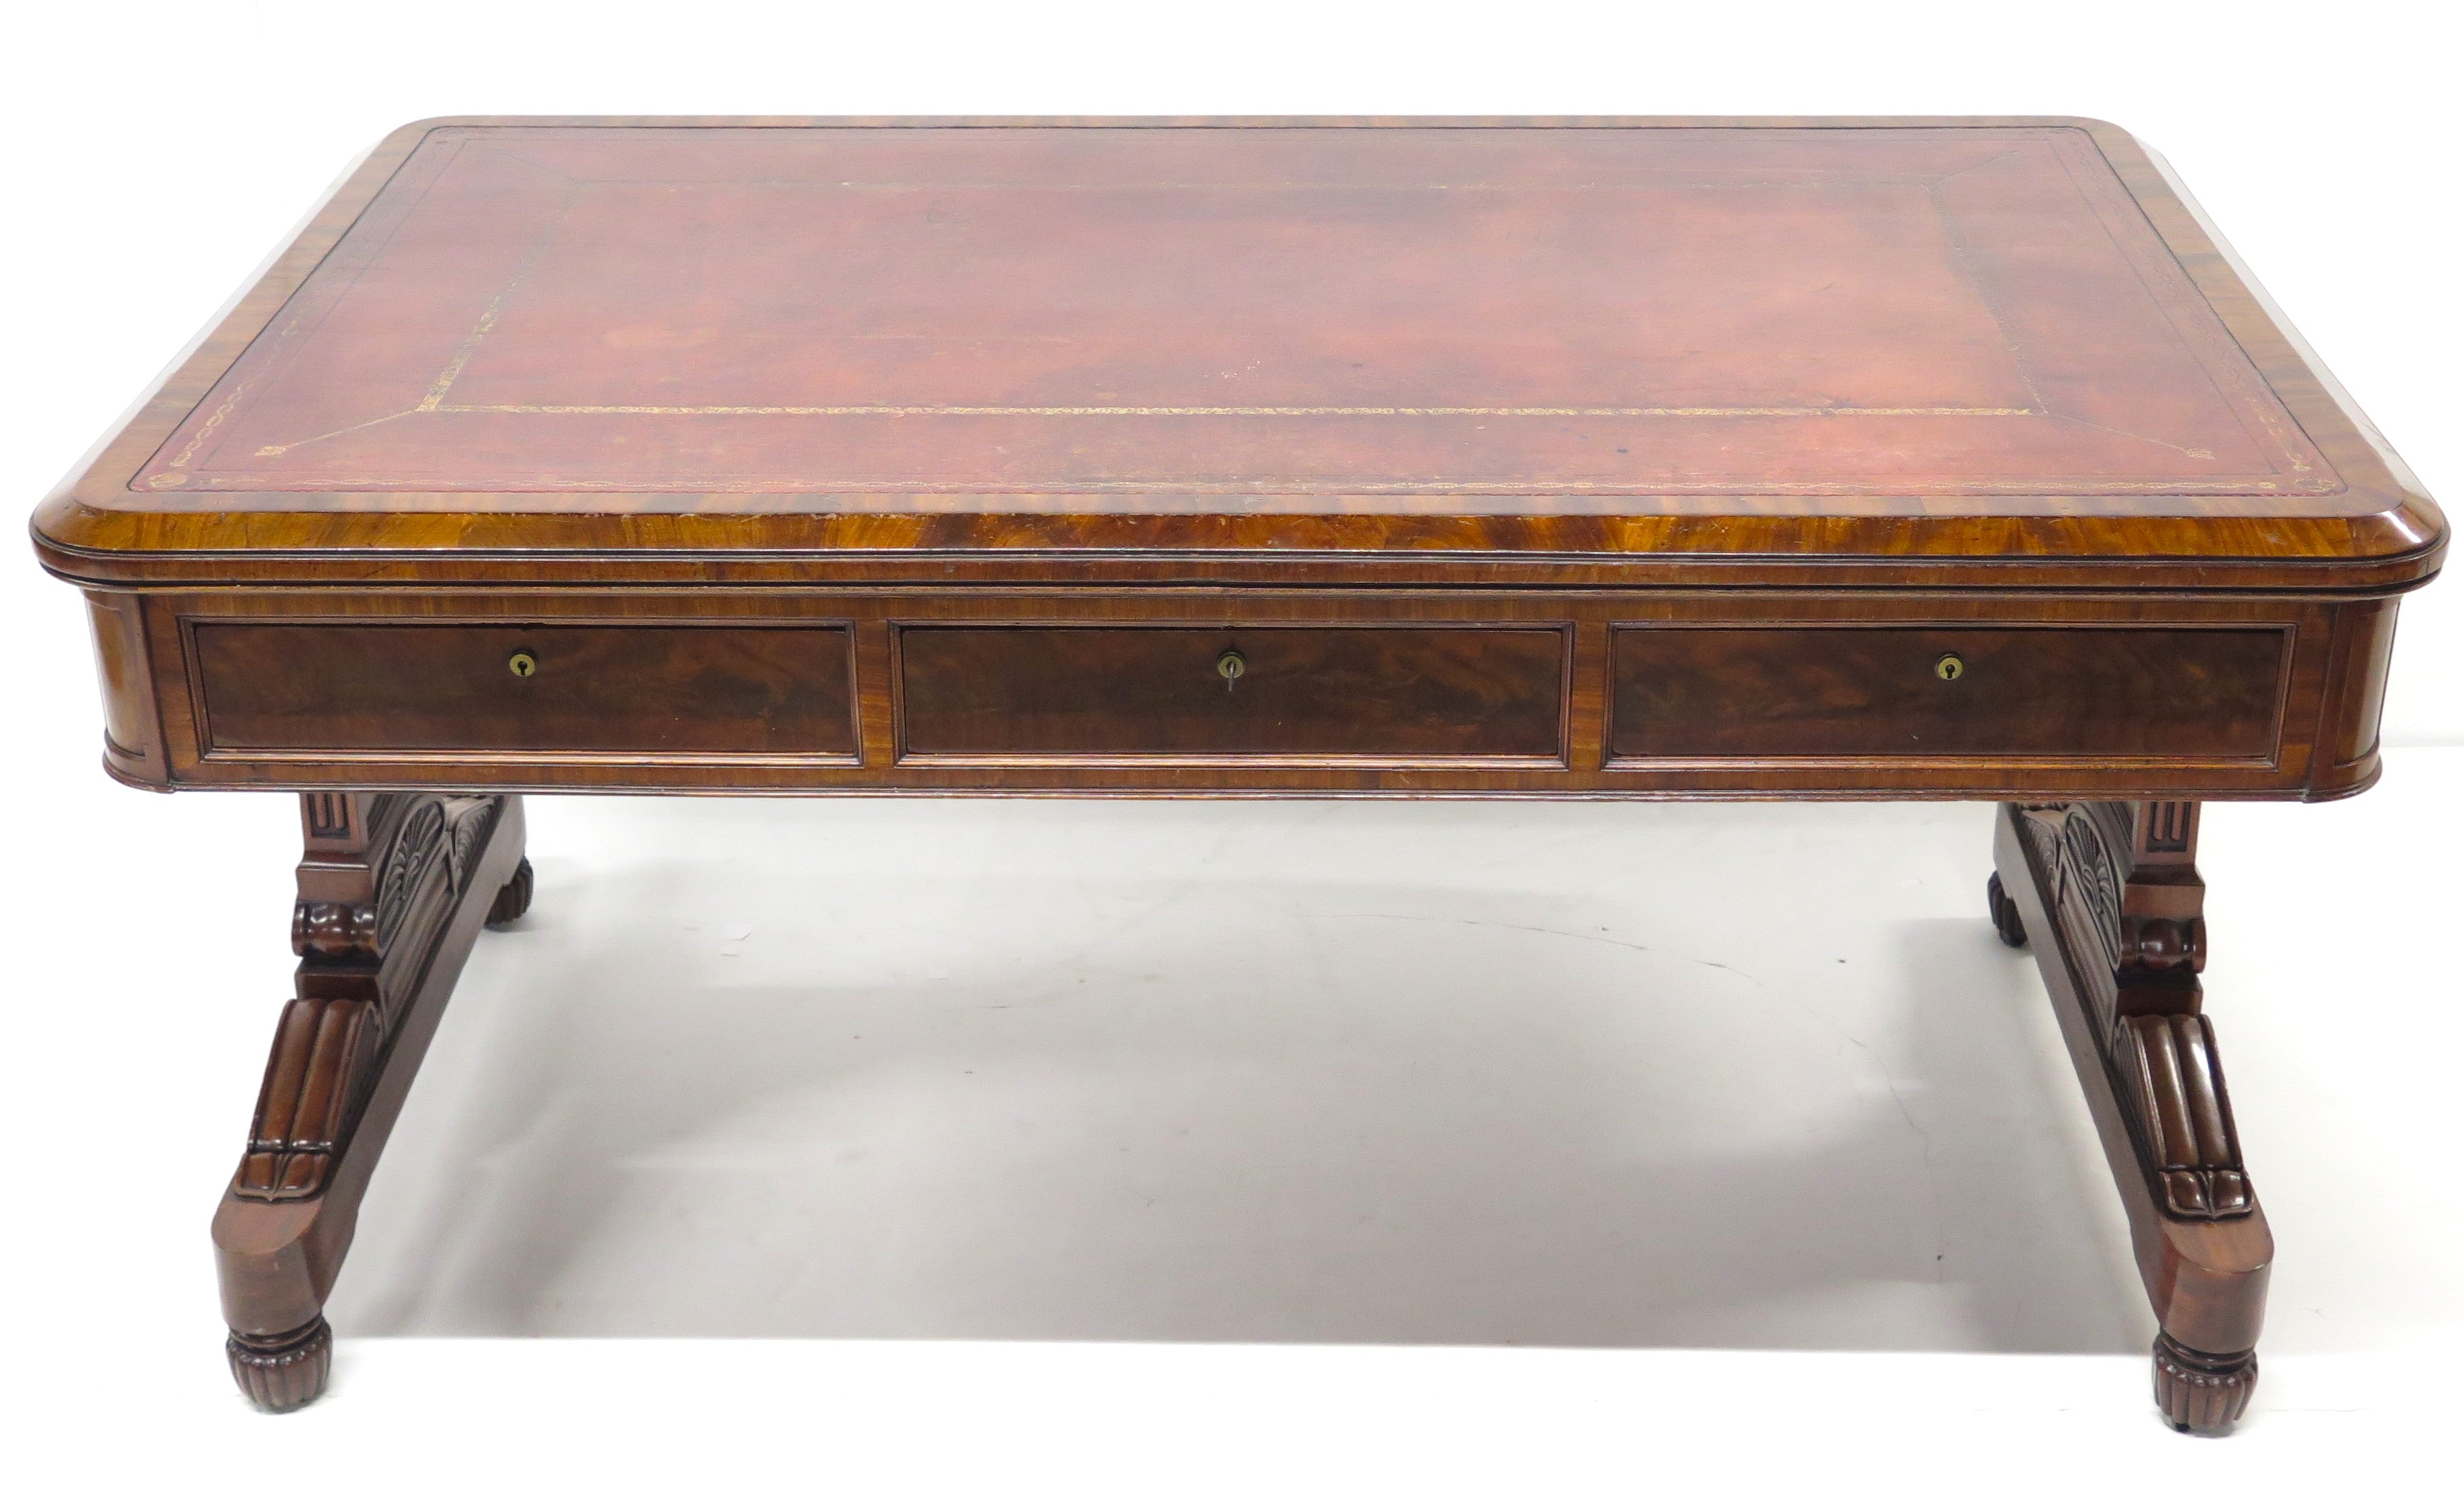 A William IV Mahogany Library Table / Writing Desk